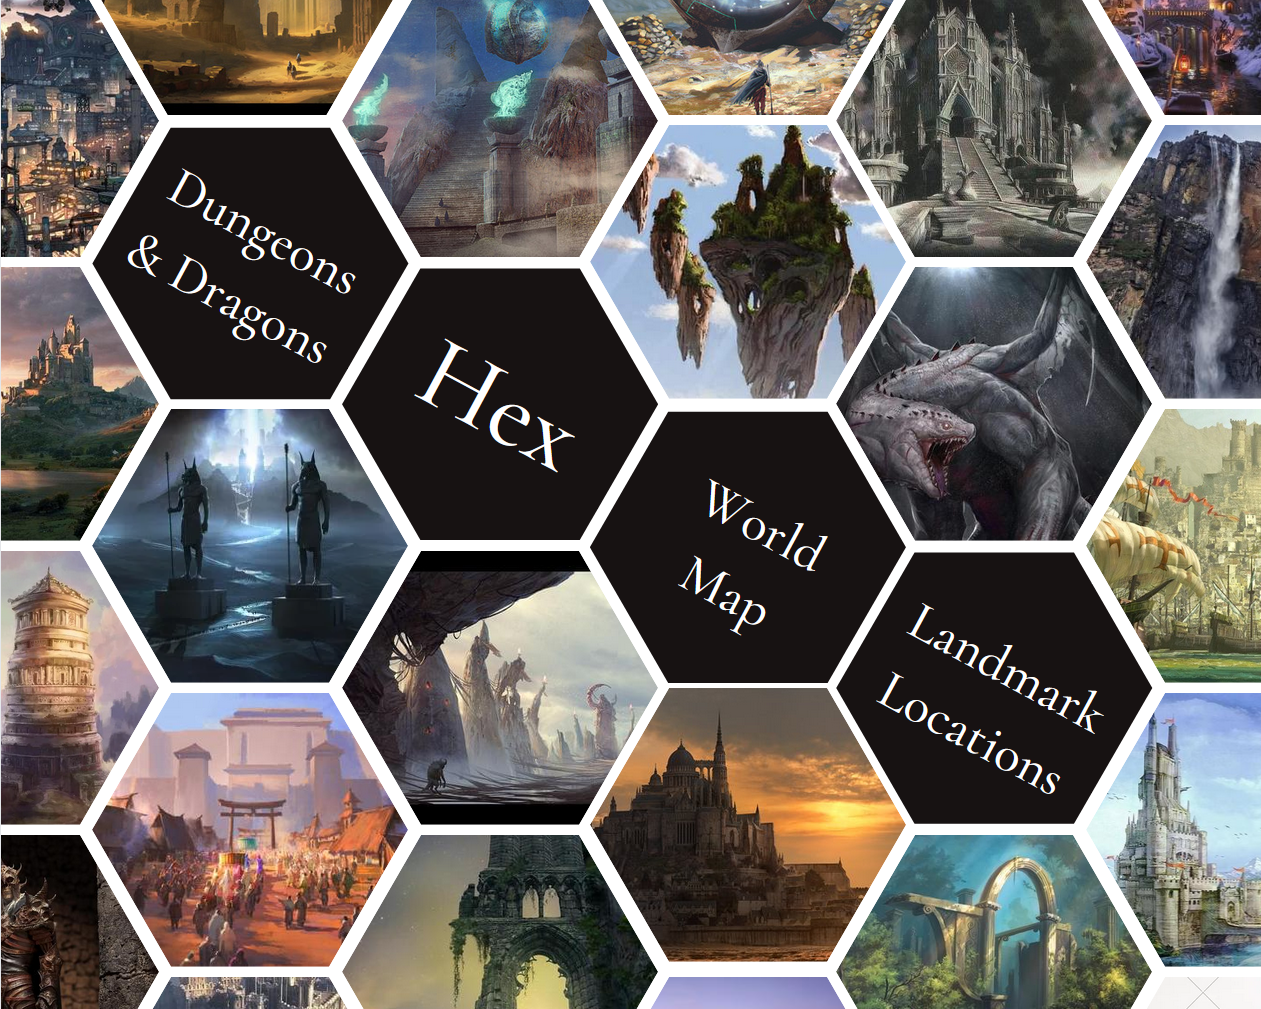 The End Games - We just got more Hex Maps suitable for